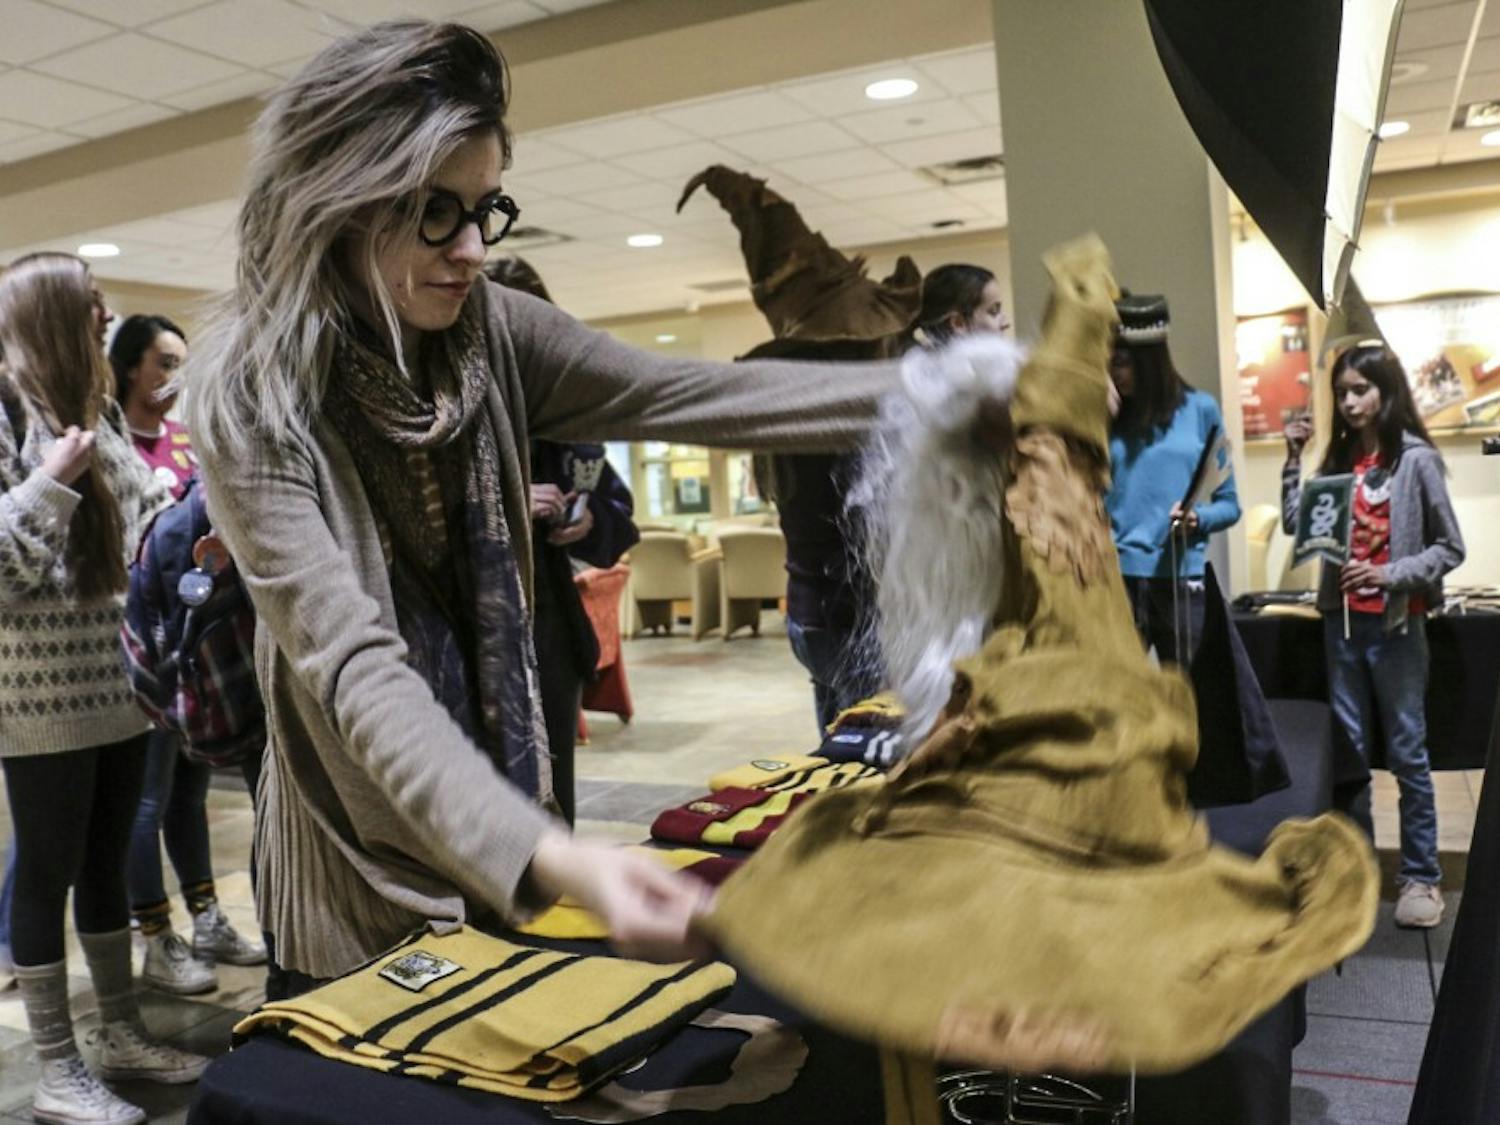 UNM students dig through Harry Potter themed props to wear before taking pictures in a photo booth at the UNM Harry Potter Day held annually in the Student Union Building on Nov. 20, 2018.